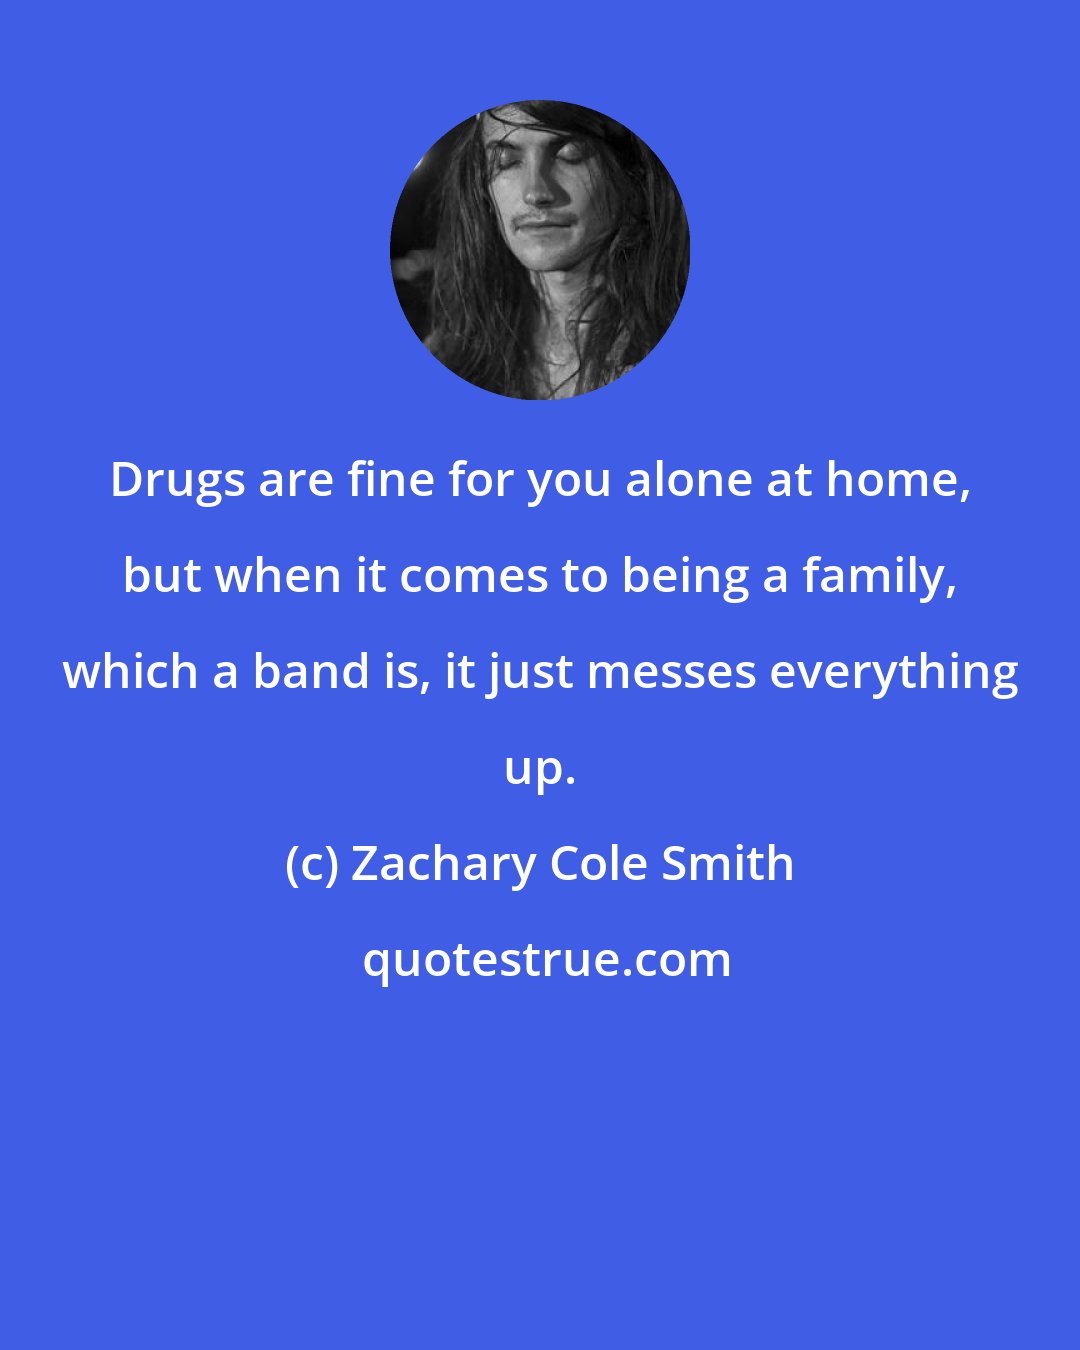 Zachary Cole Smith: Drugs are fine for you alone at home, but when it comes to being a family, which a band is, it just messes everything up.